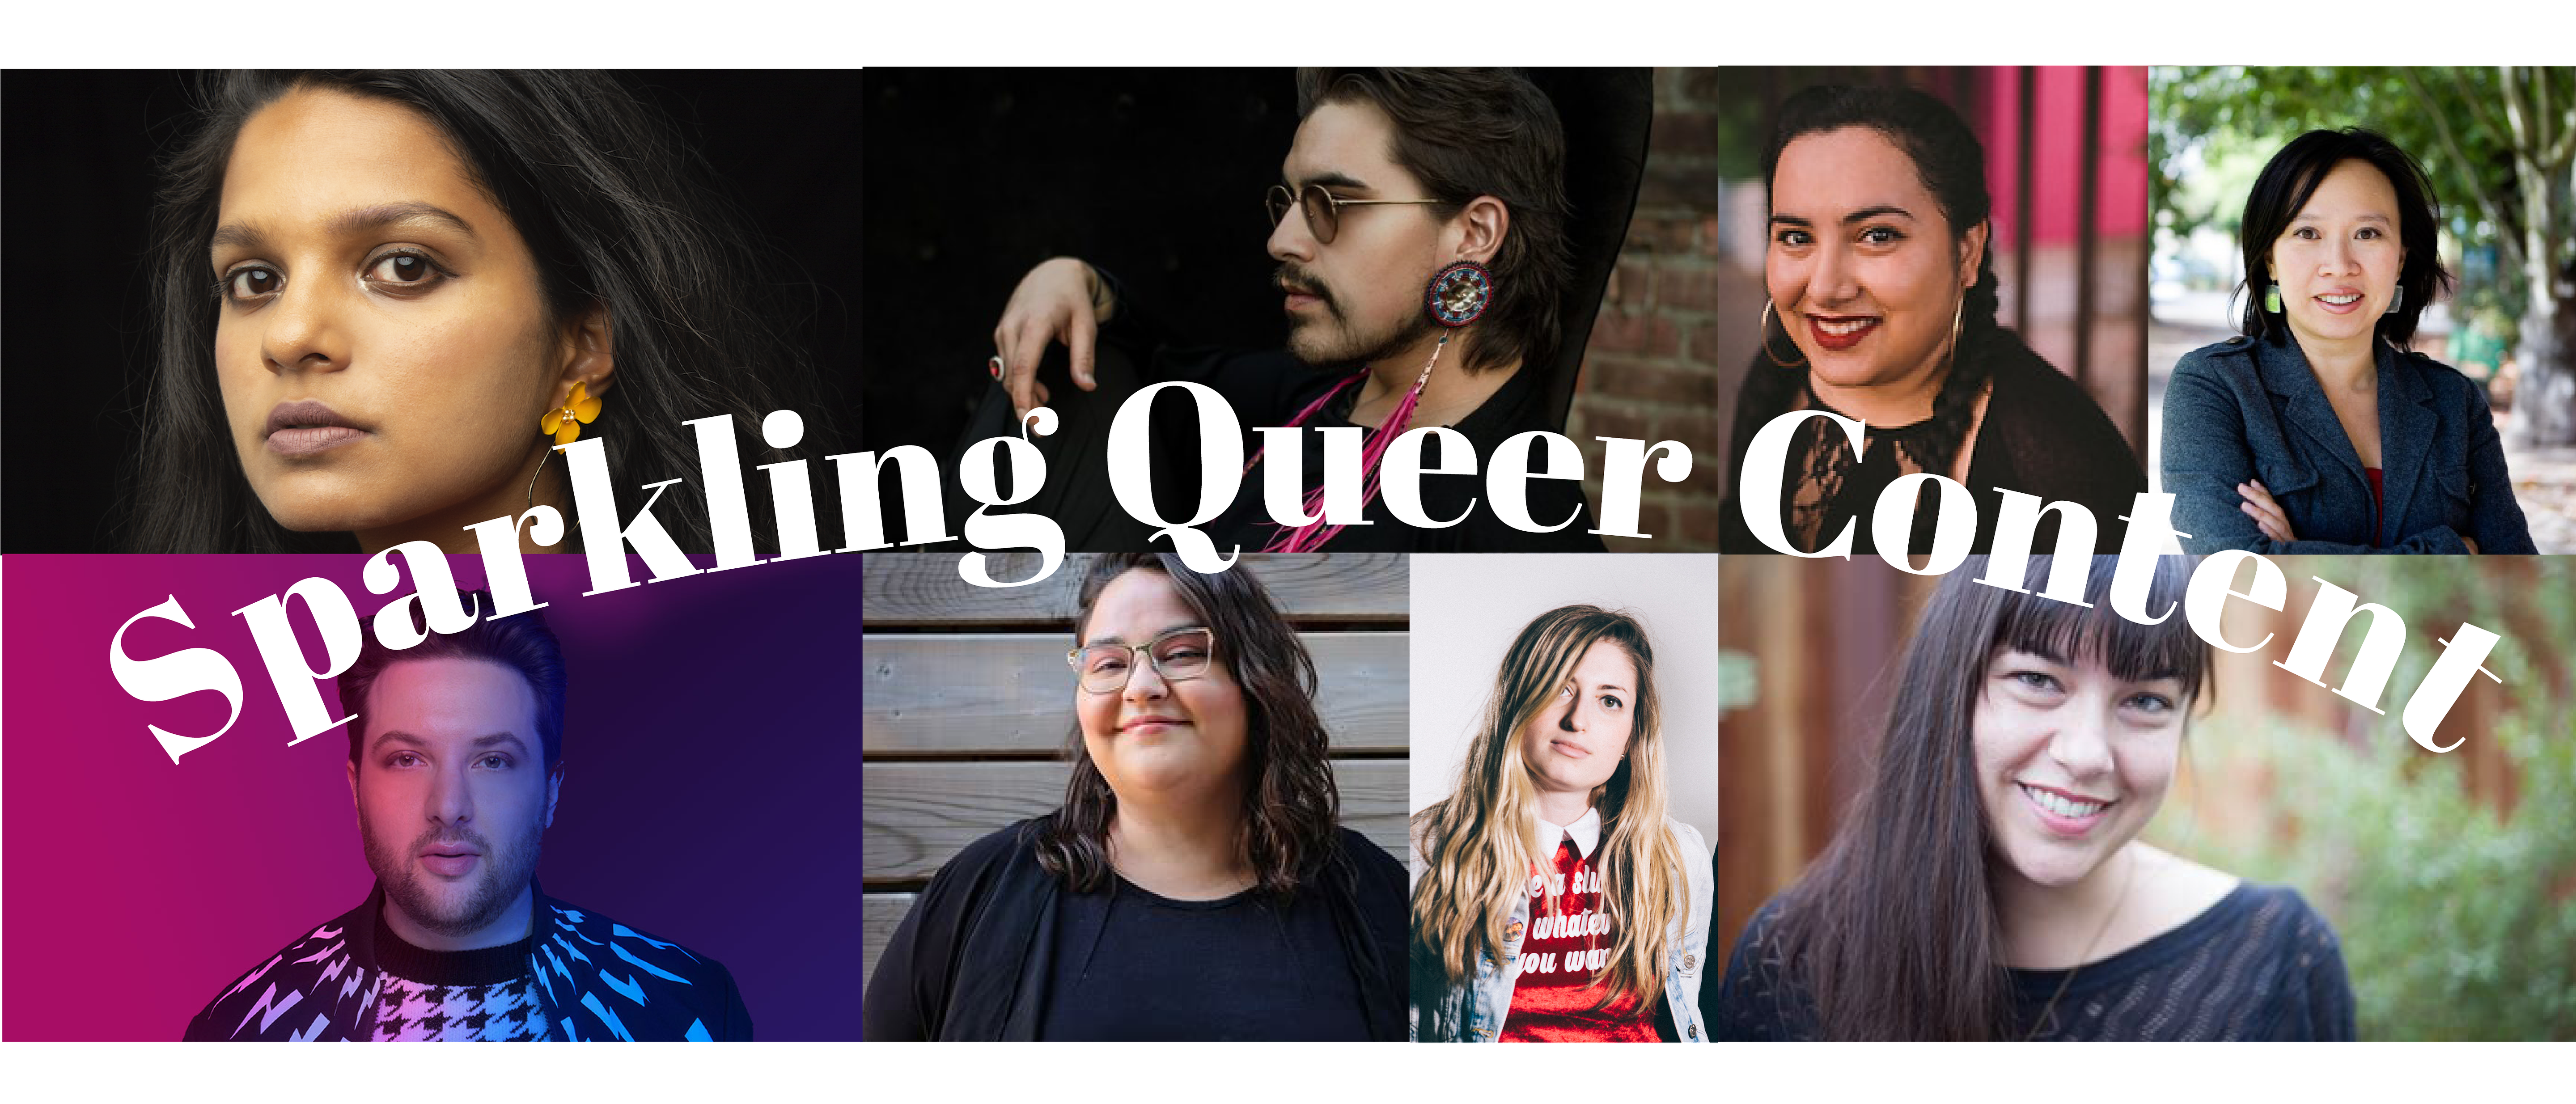 Header image is photos of authors with the text Sparkling Queer Content in bold white letters. Author photos left to right top to bottom: Sarah Thankam Mathews, Joshua Whitehead, Sonor Reyes, Malinda Lo, L.C. Rosen, Jas. M. Morgan, Jill Gutowitz and Nina LaCour